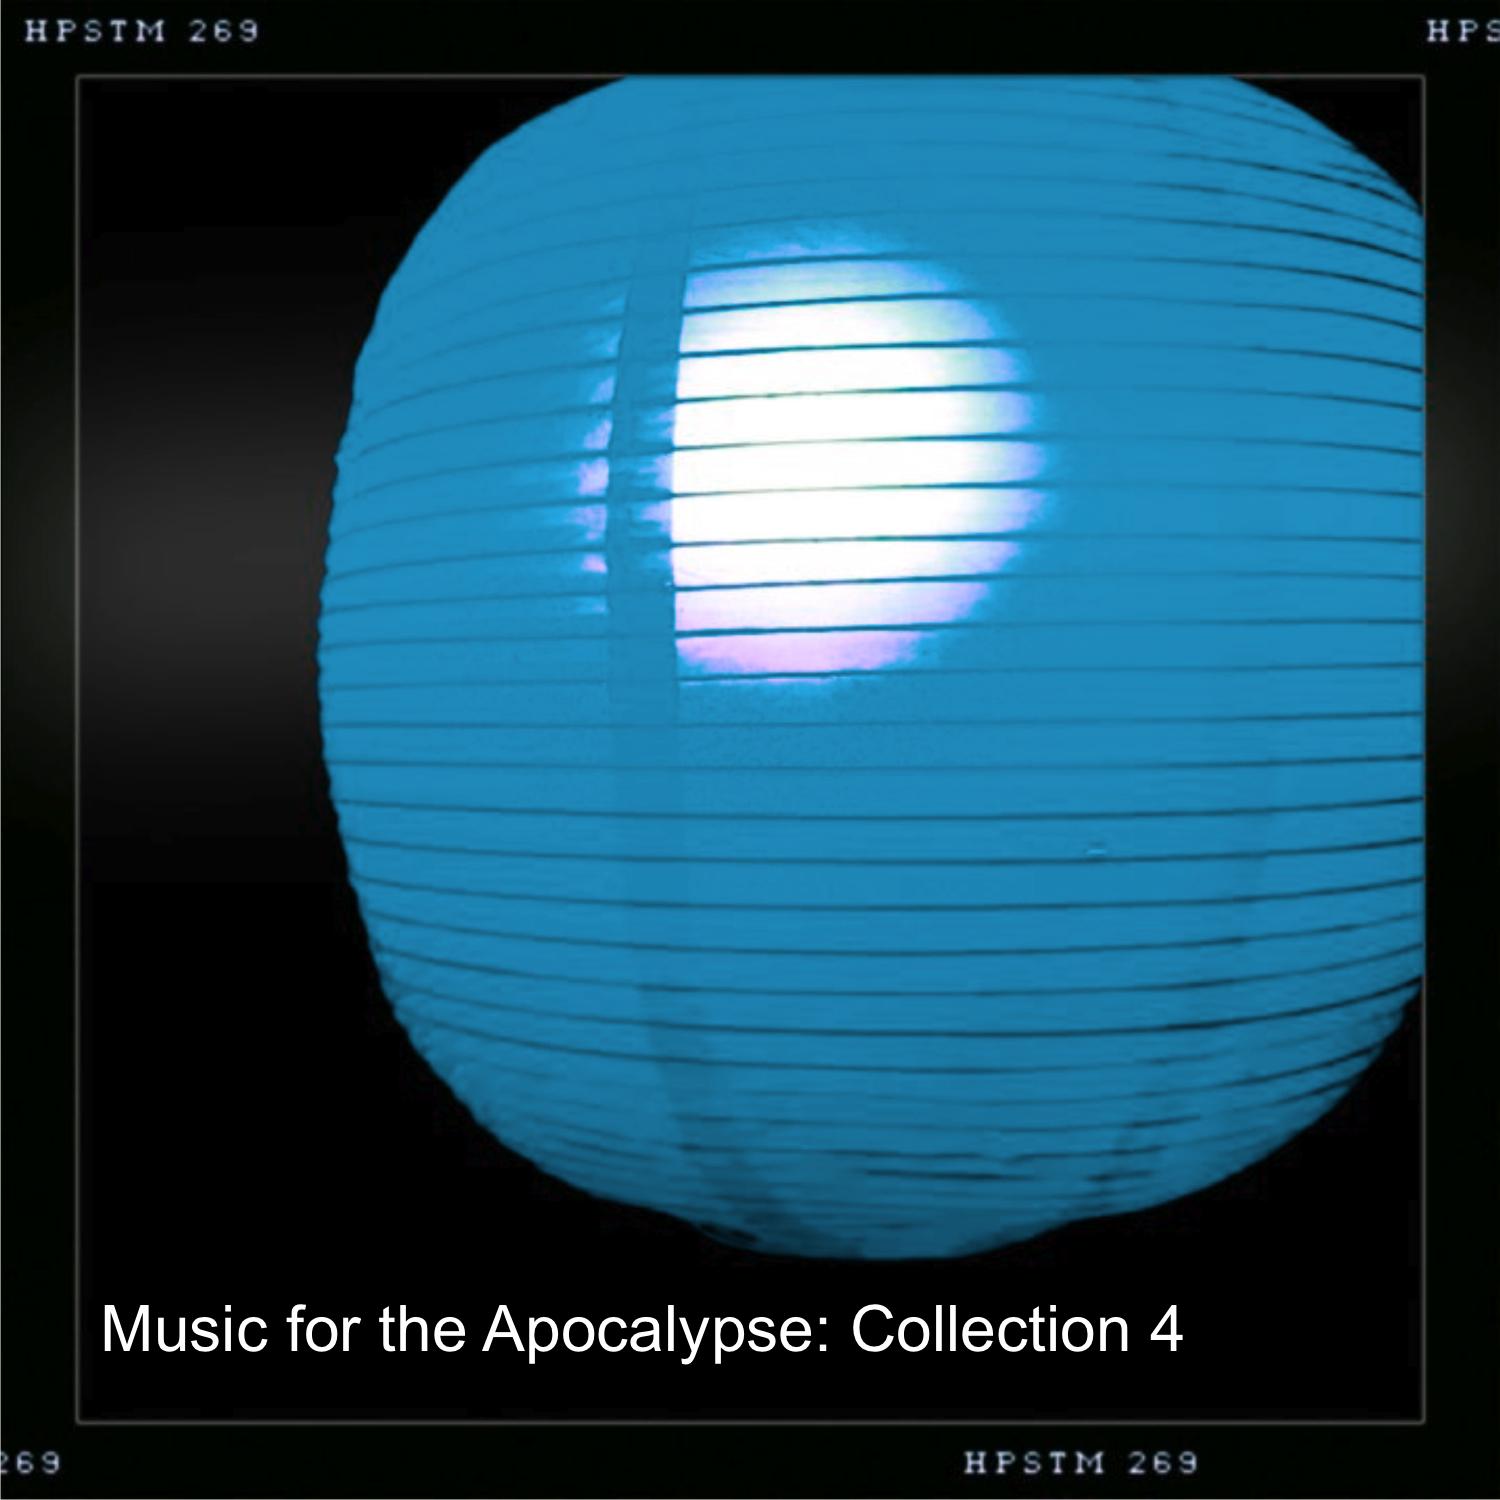 Music for the Apocalypse: Collection 4